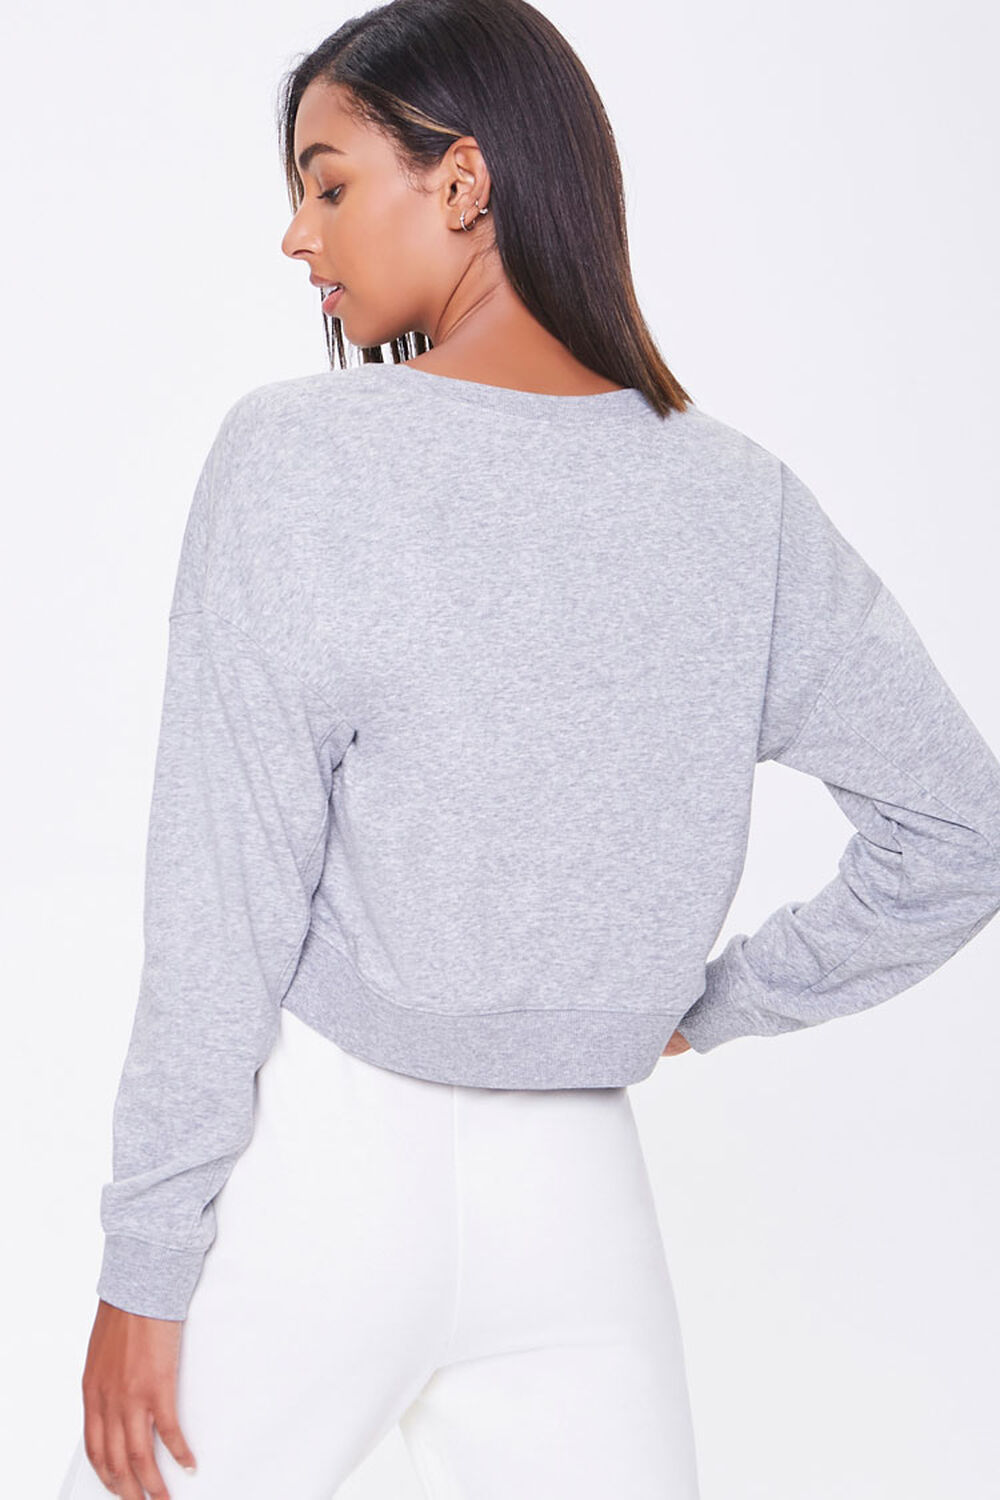 HEATHER GREY Split-Neck French Terry Pullover, image 3